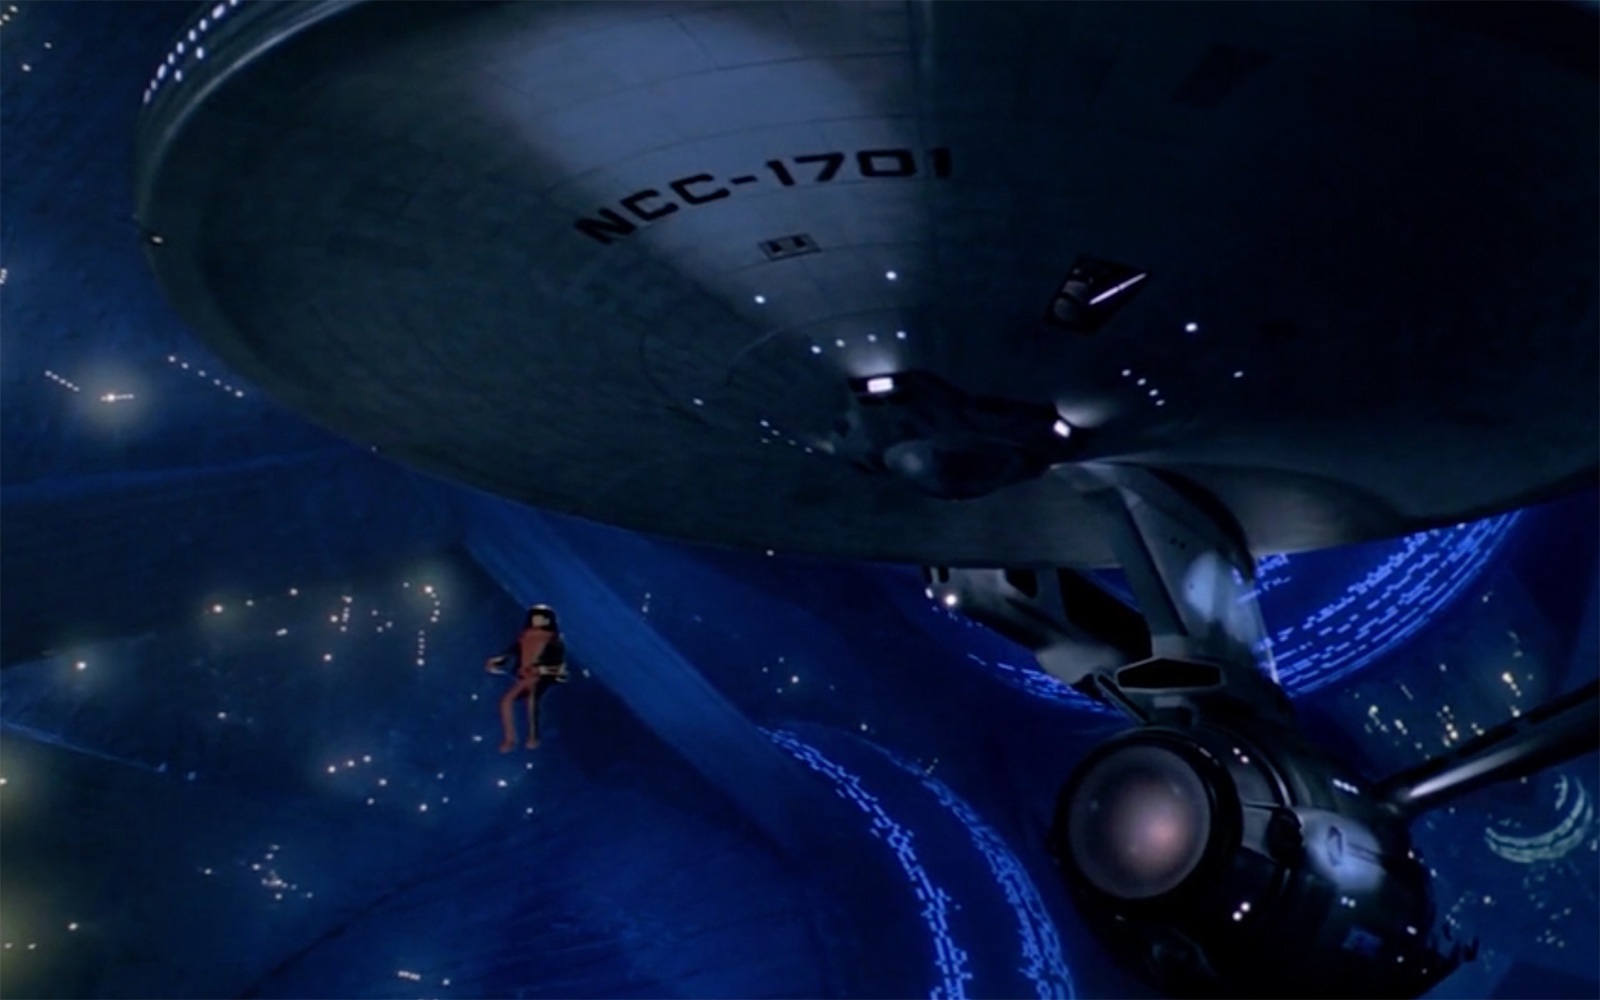 Star Trek: The Motion Picture #2